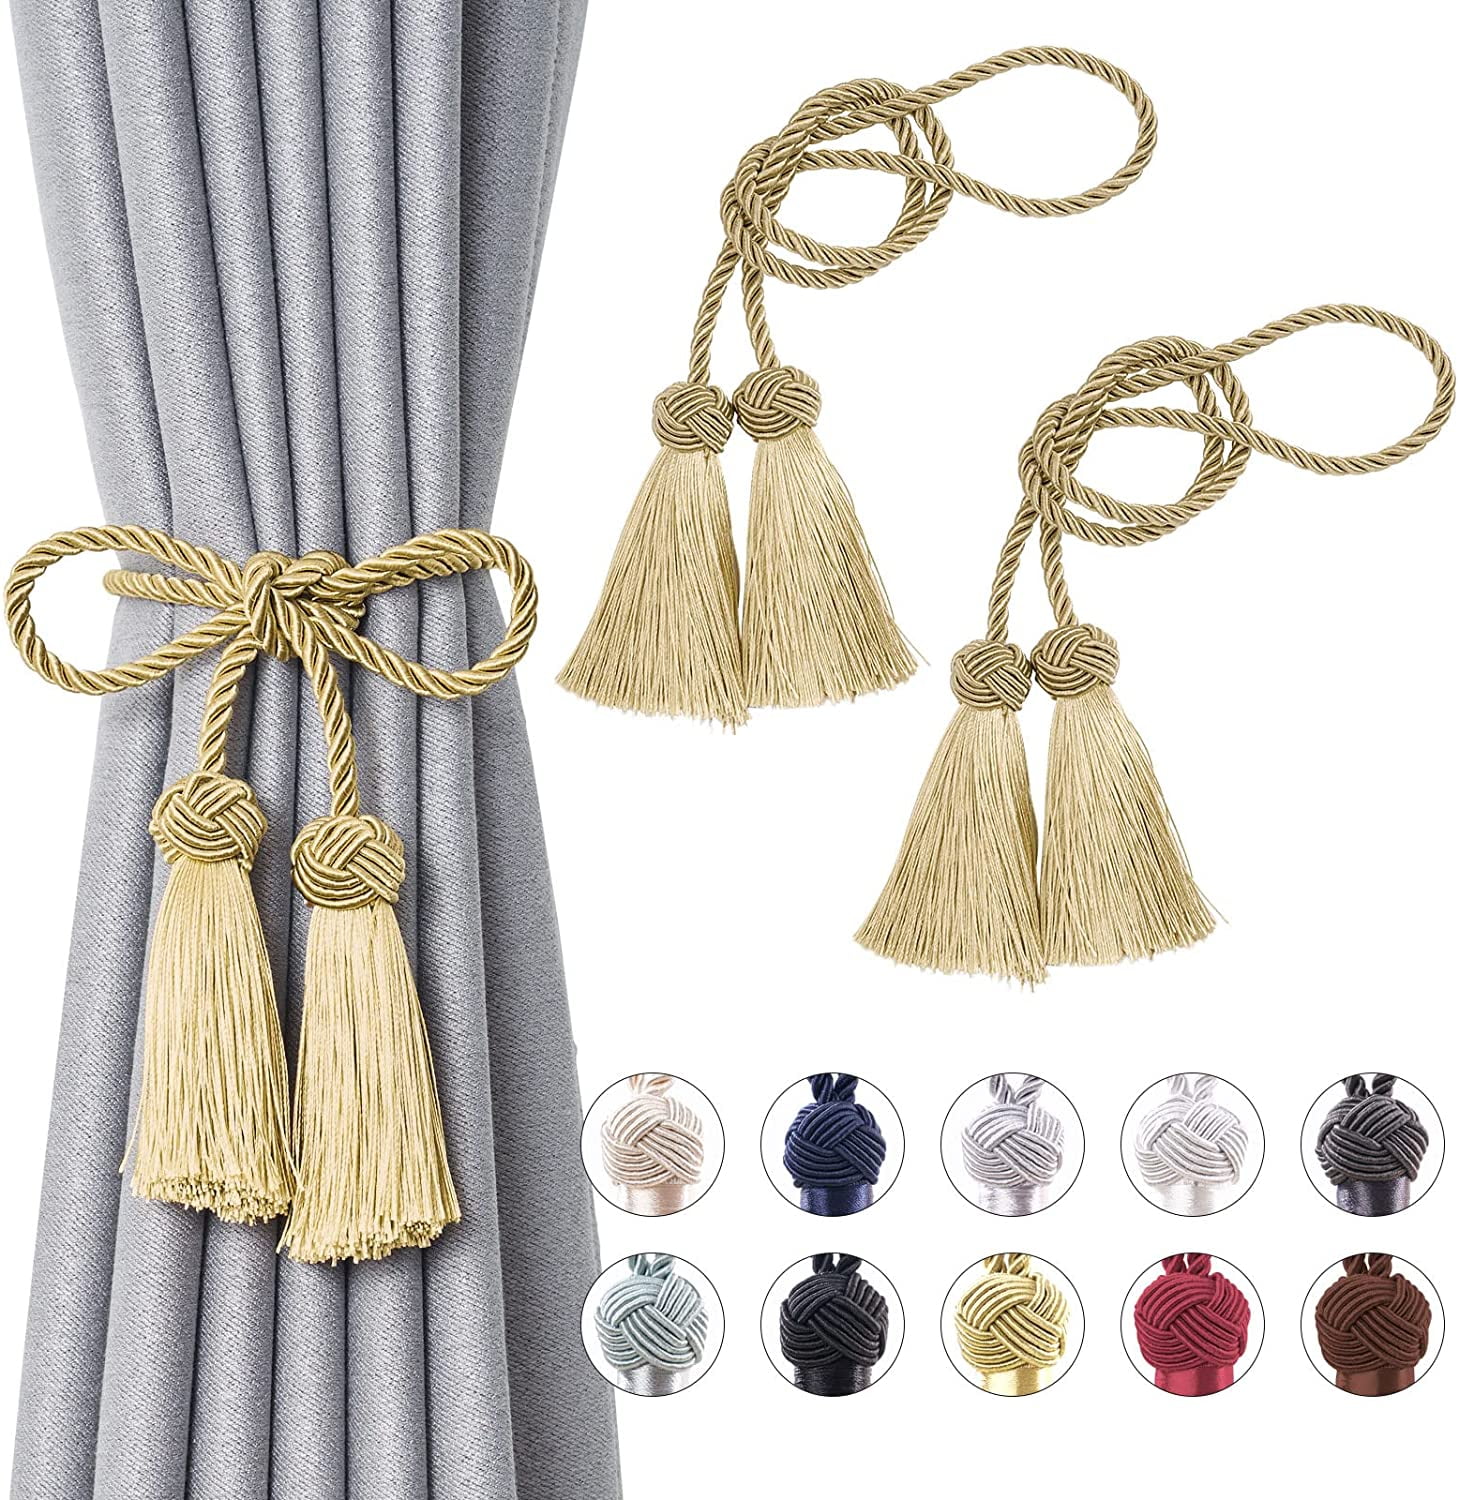 Color : A Stylish 1Pair Curtain Tiebacks Crystal Tassels Fringe Curtain Tieback Tie Backs Room Accessories Shower Curtain Holder Wall for Home Decorative 